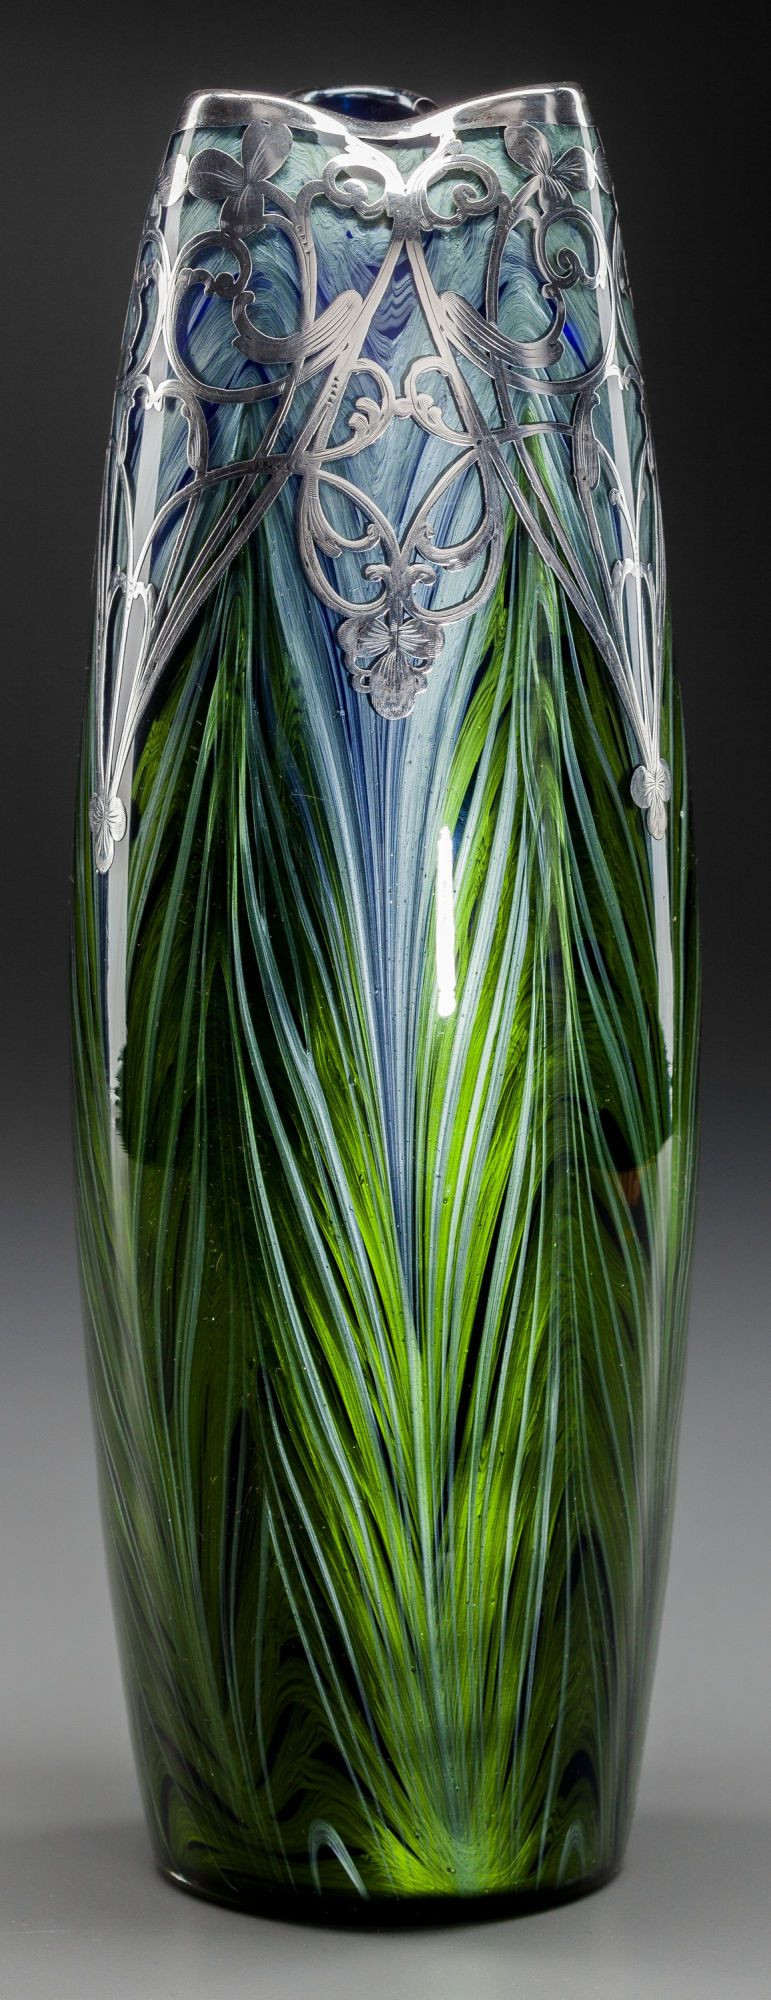 27 Recommended Austrian Vases Markings 2023 free download austrian vases markings of loetz iridescent feather pull glass vase with silver overlay throughout loetz iridescent feather pull glass vase with silver overlayklostermuhle austria circa 1905